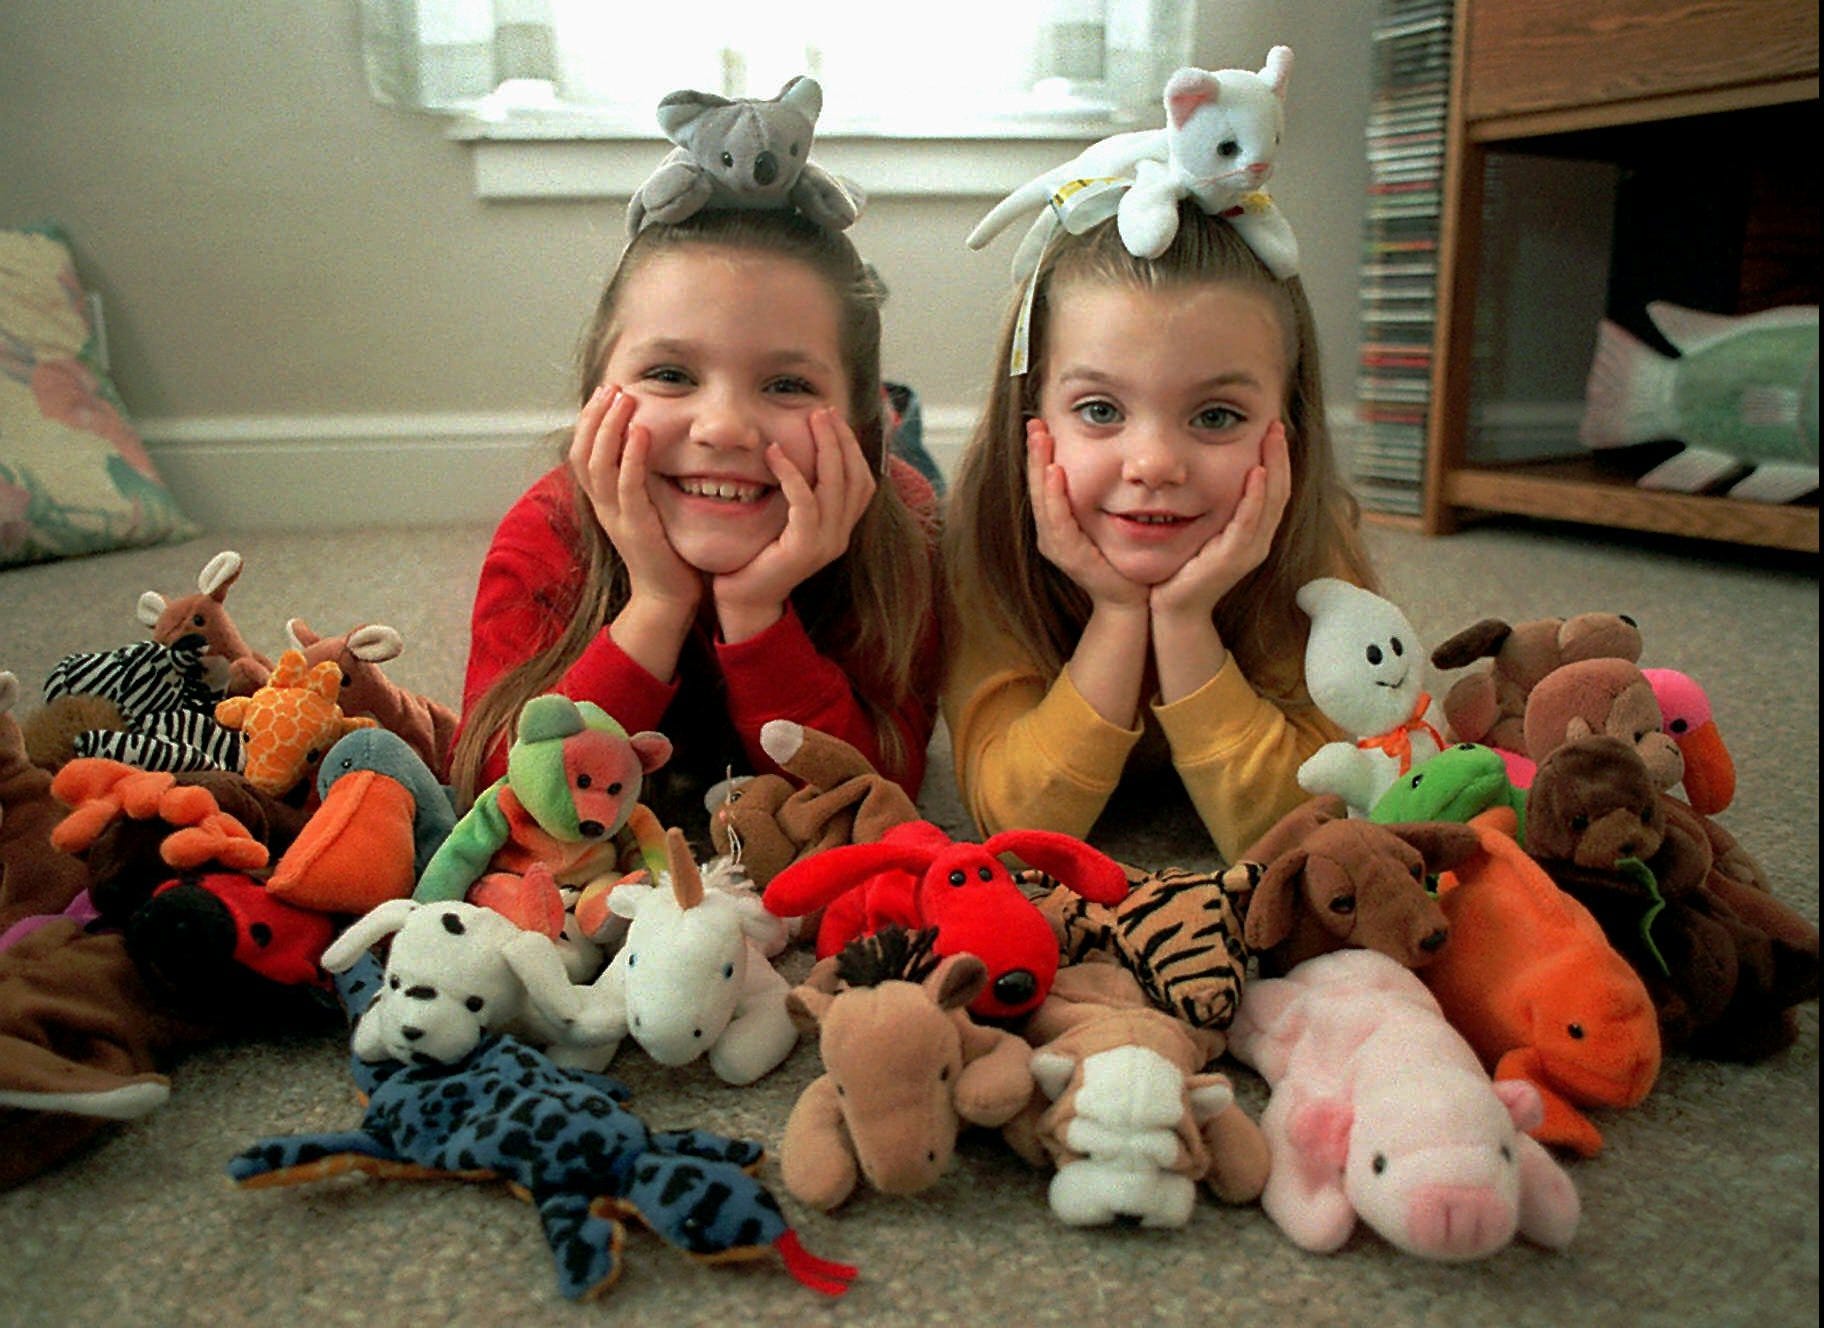 beanie baby collectors looking to buy